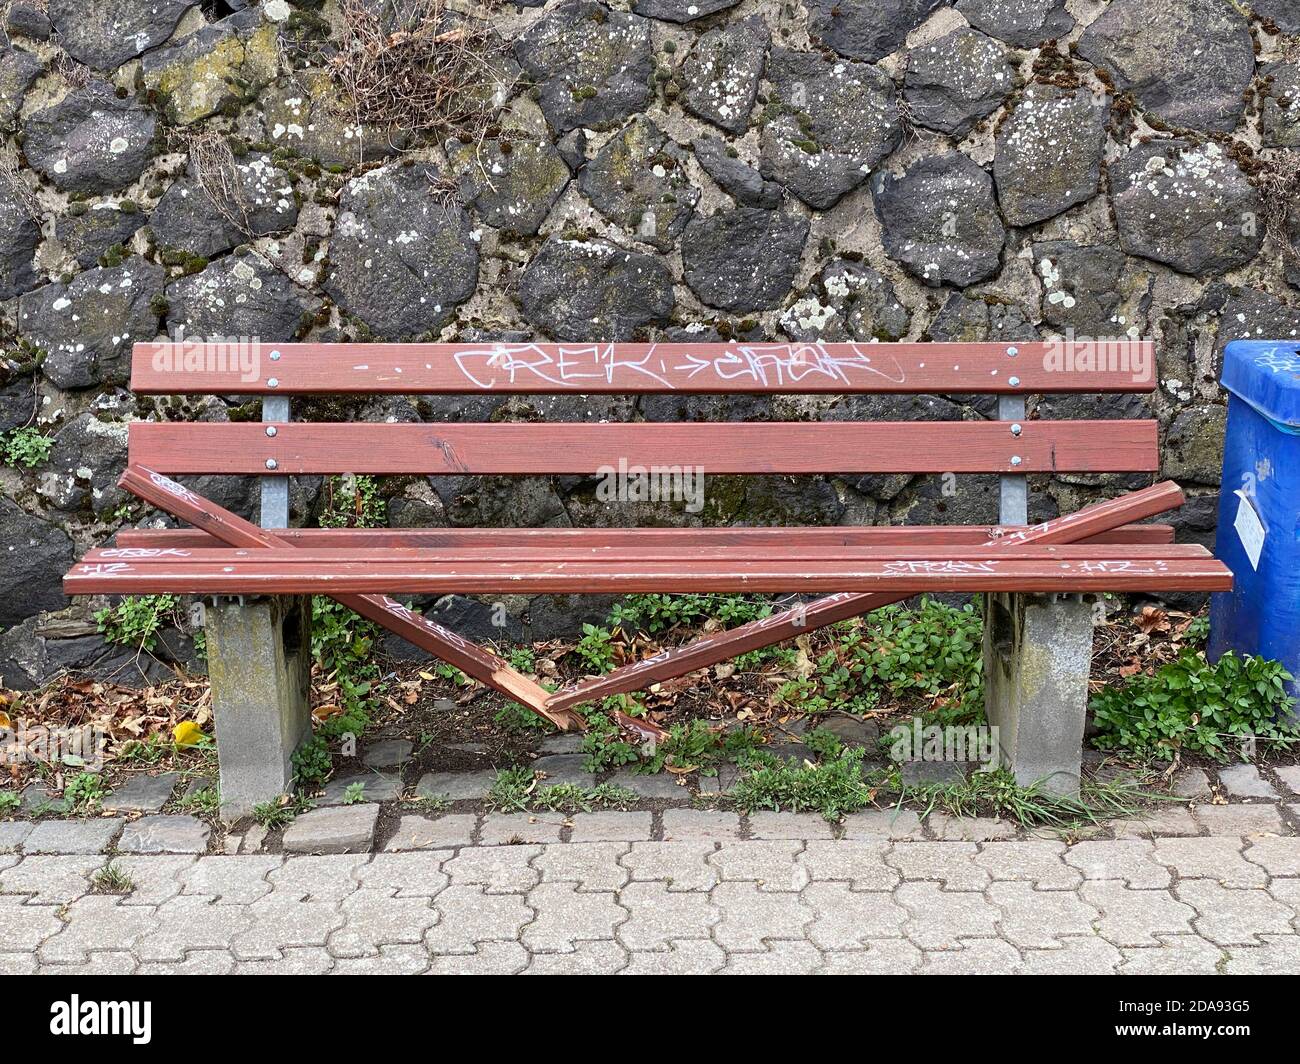 Vandalism, wilfully destroyed park bench, wooden bench, on a pavement, Duisburg, NRW, Germany Stock Photo